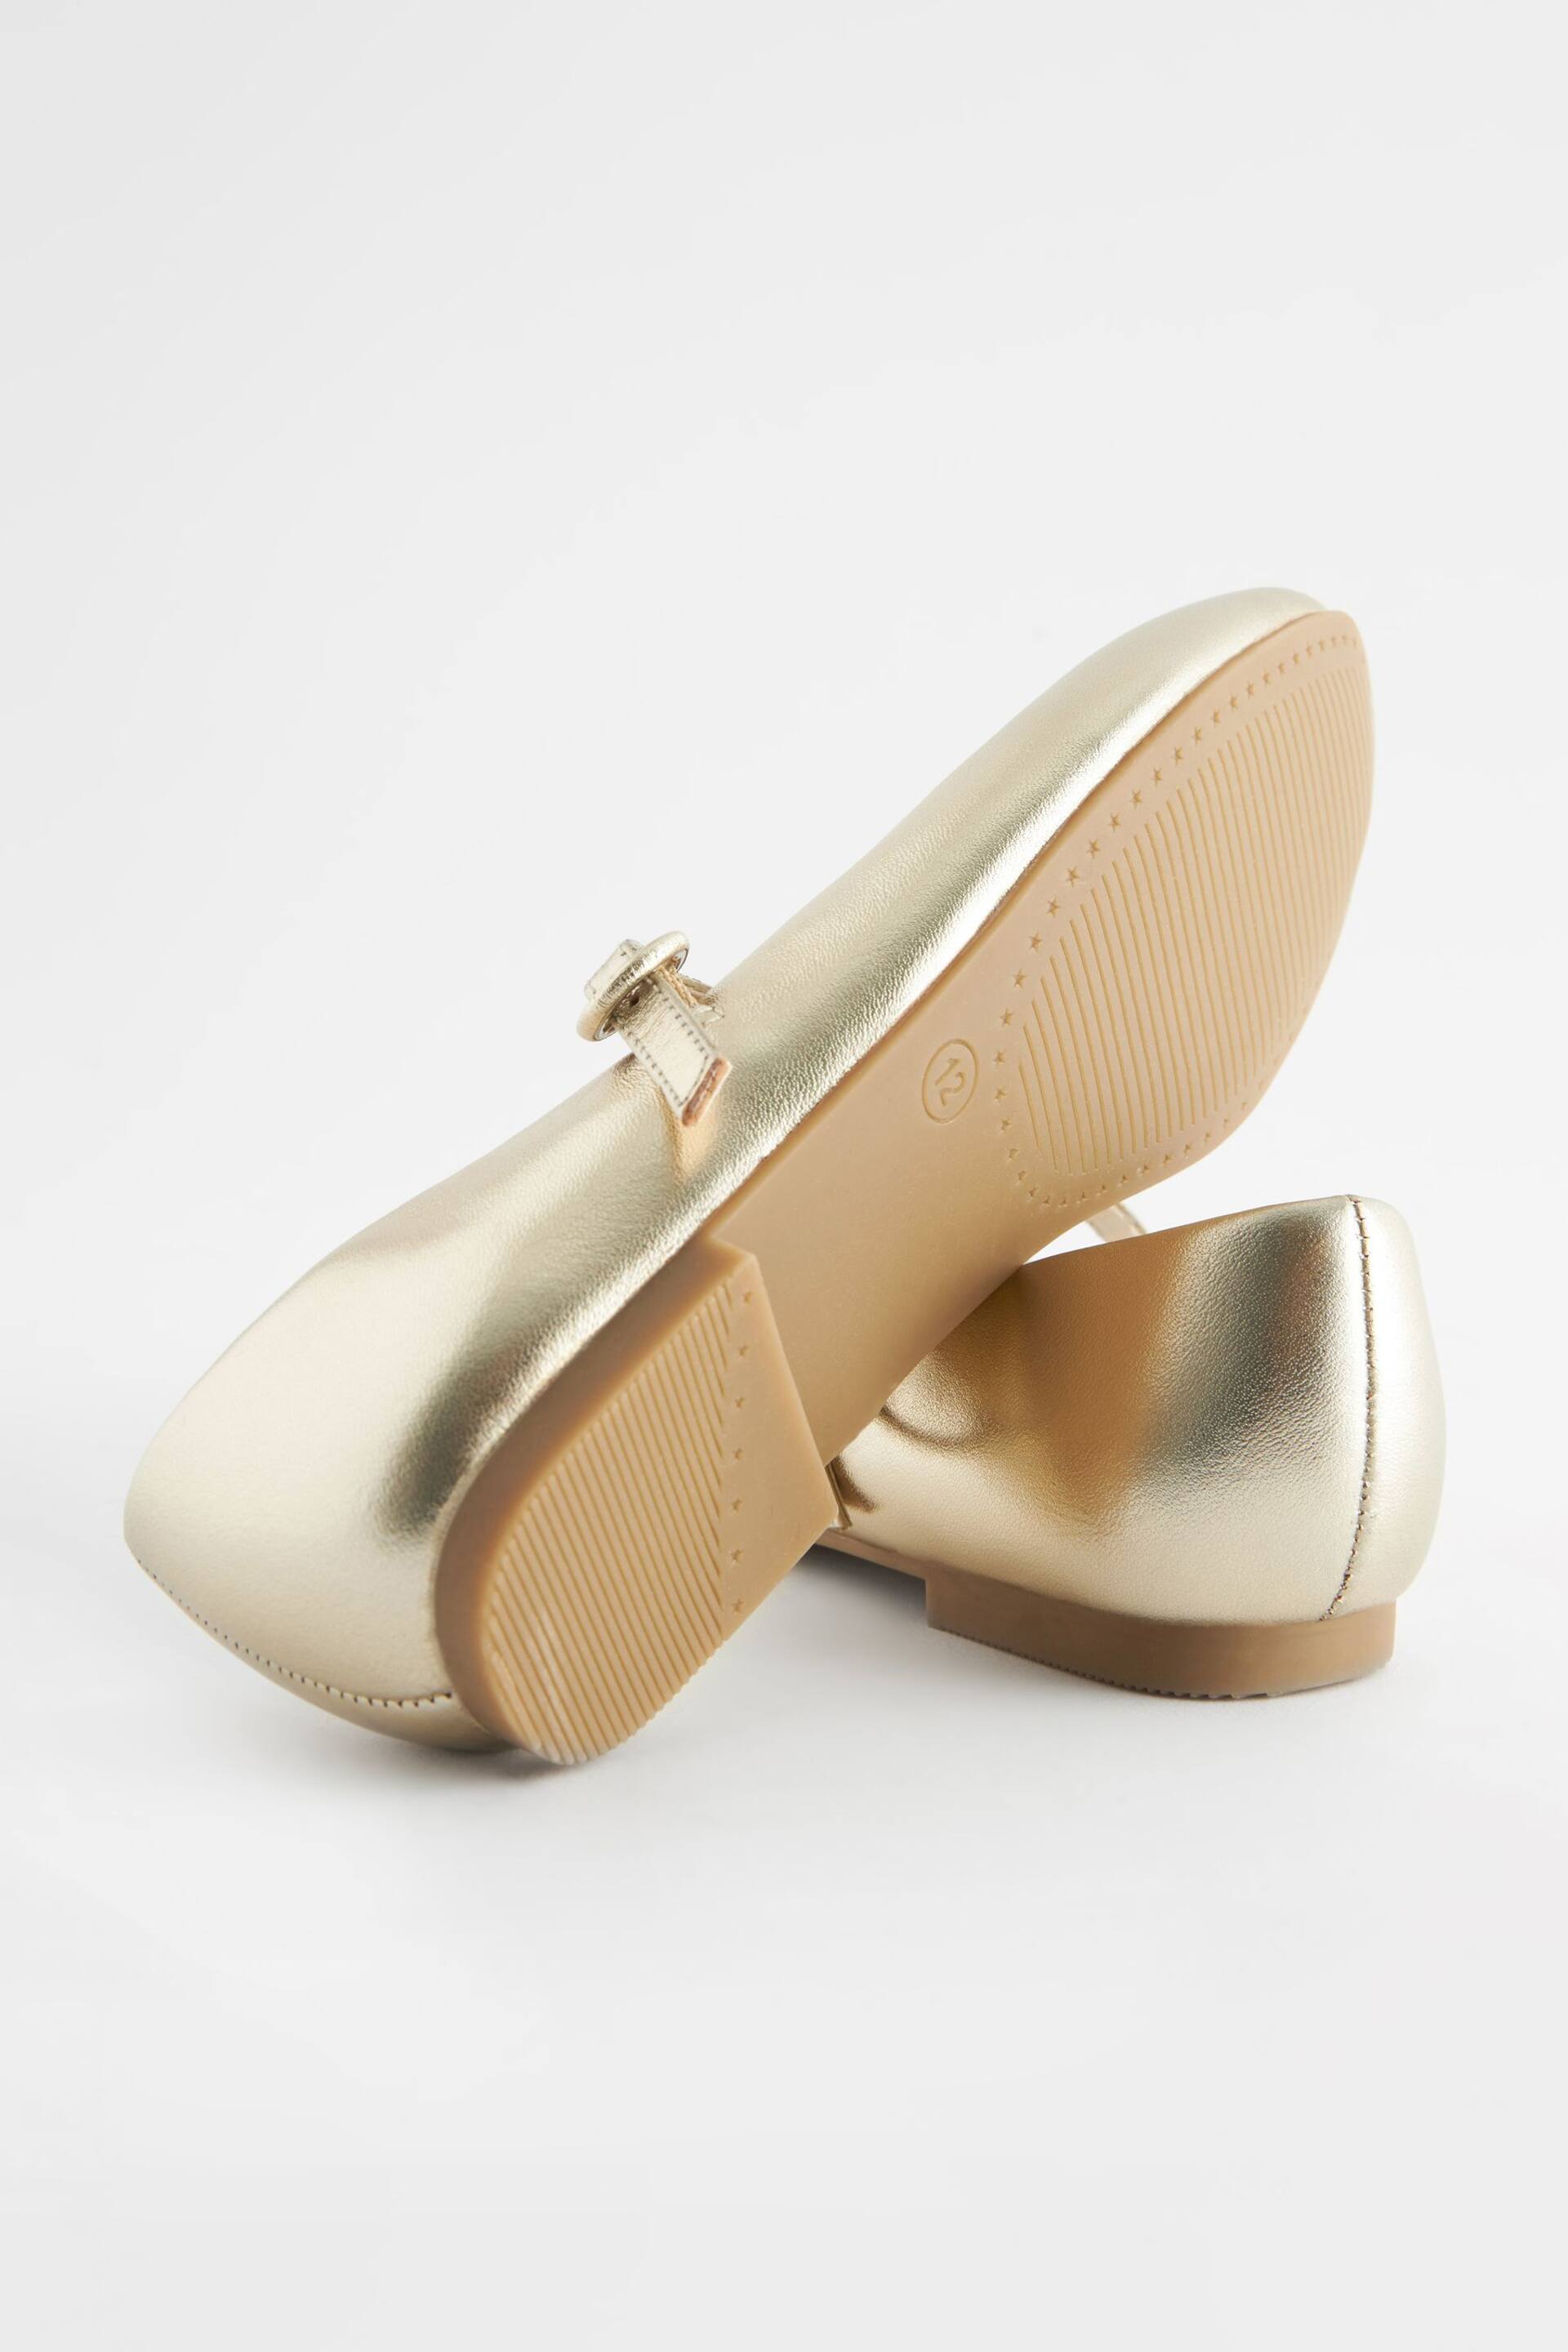 Gold Metallic Leather Mary Jane Occasion Shoes - Image 4 of 6